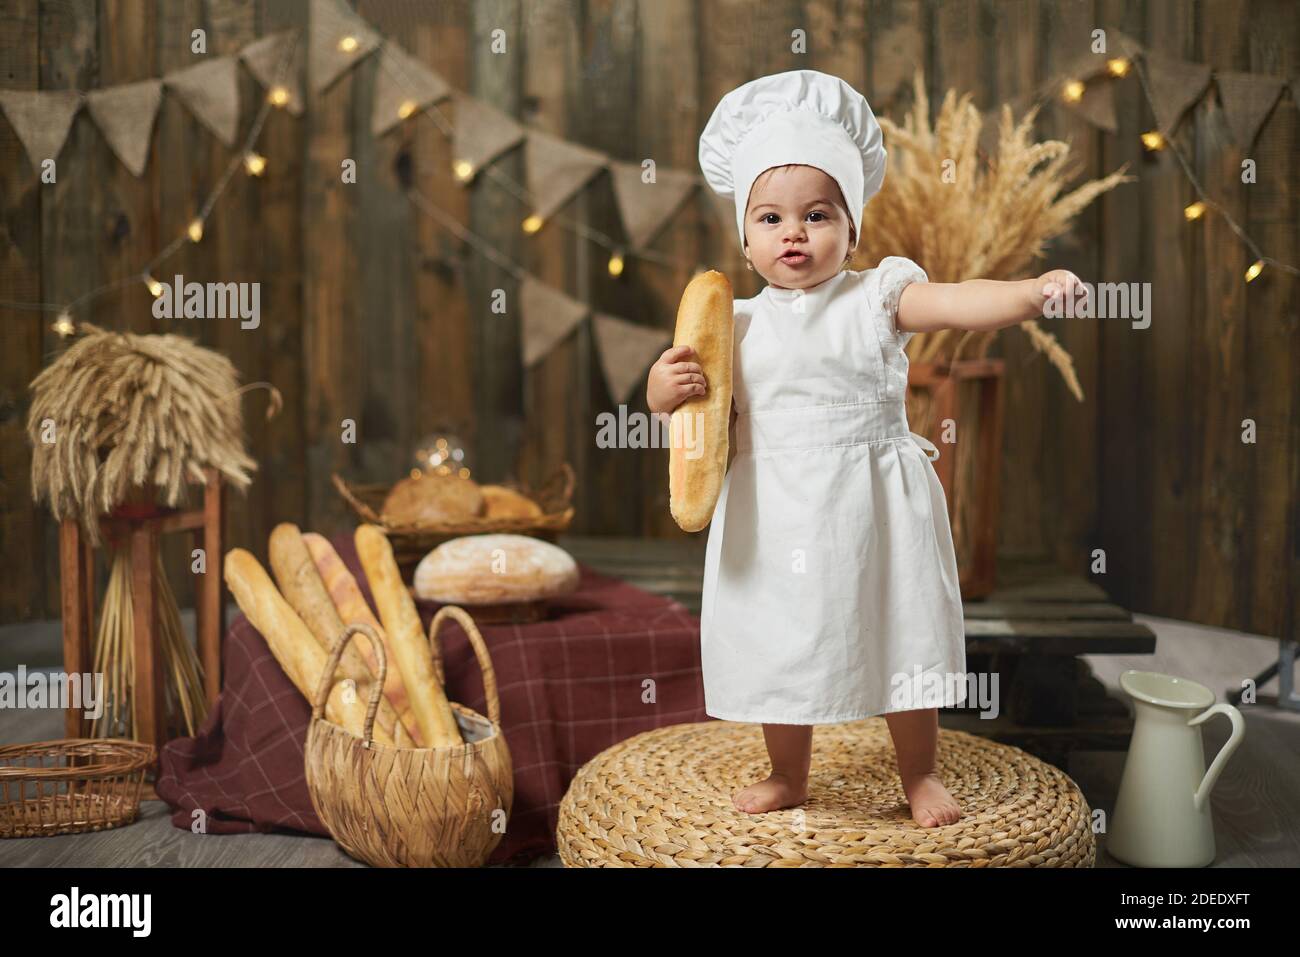 Cute little baby wearing baker costume with a French baguette in a rustic interior Stock Photo